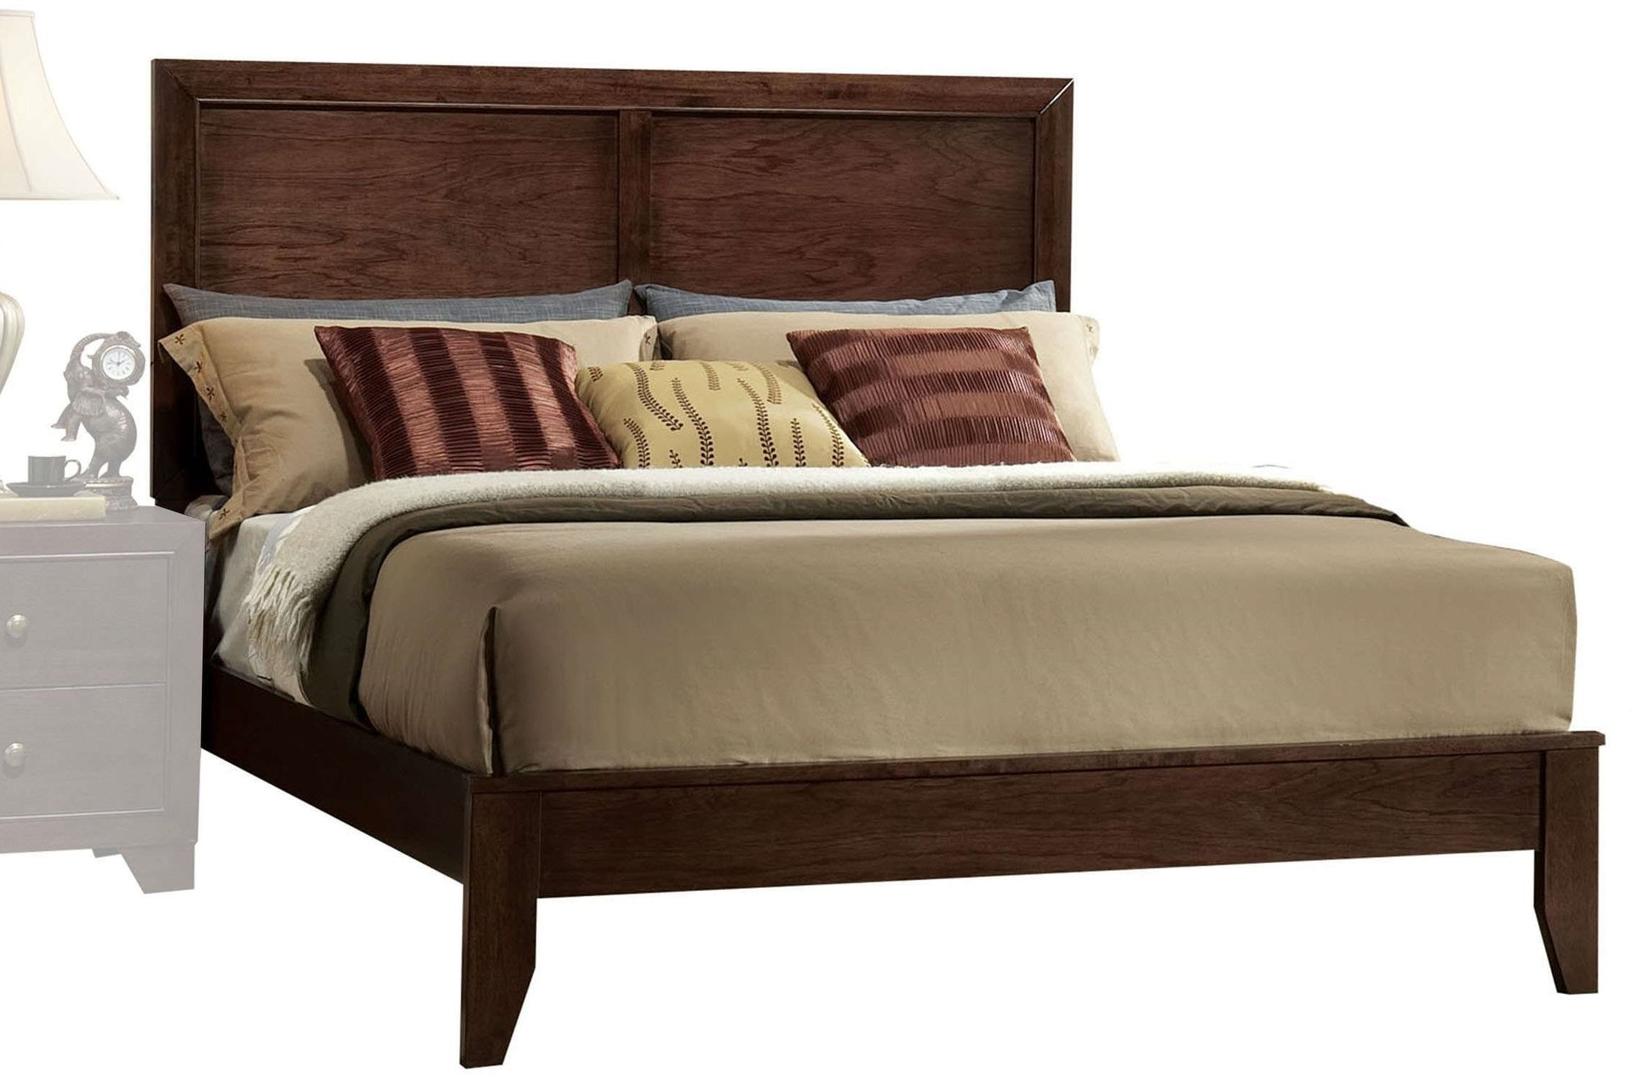 90" X 76" X 52" Espresso Rubber and Tropical Wood California King Bed